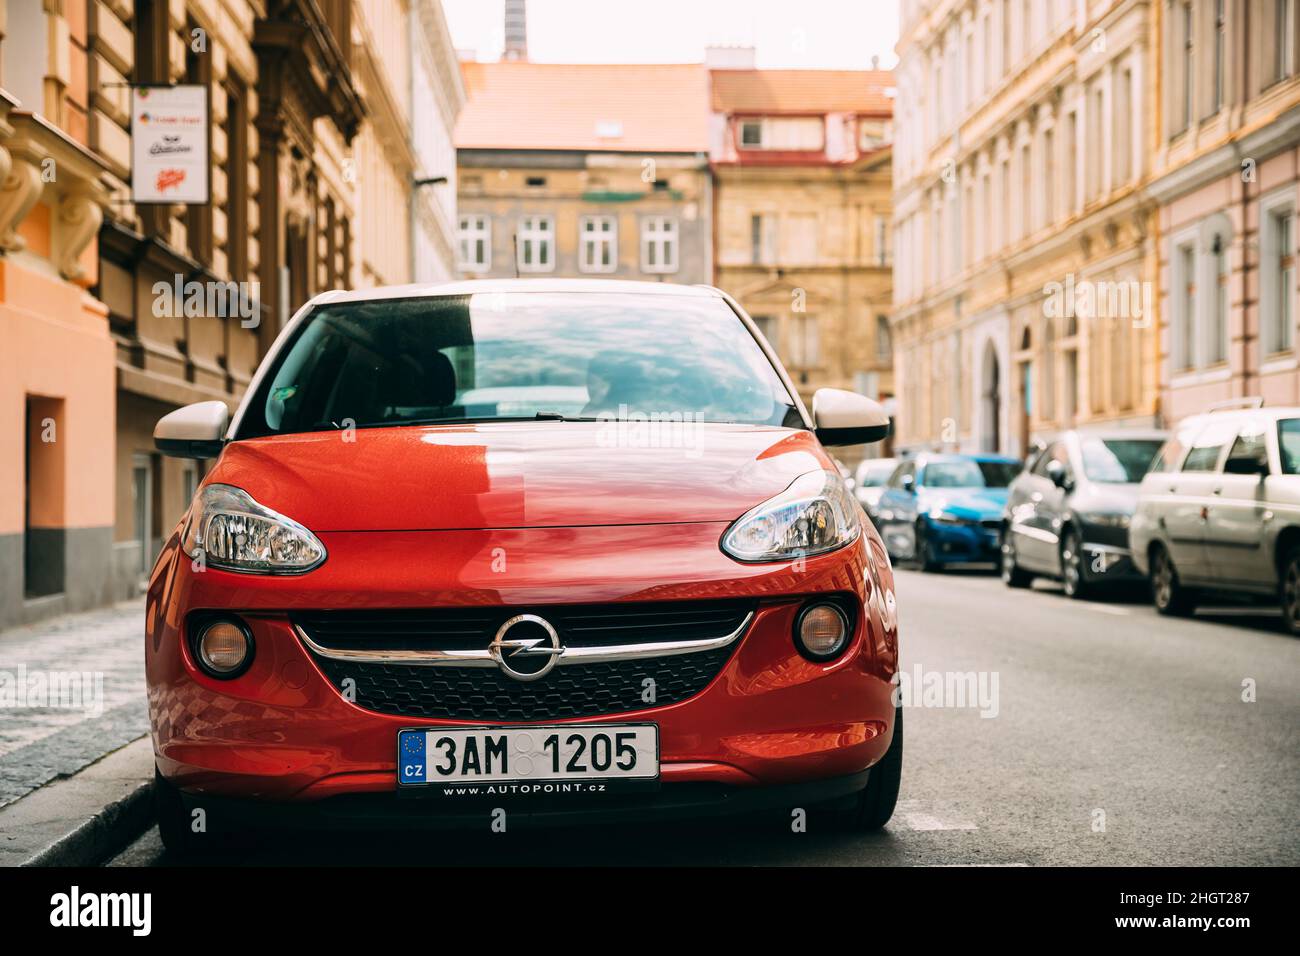 Red Opel Adam Car Parked In Street Of Residential Area. Opel Adam Is City Car Produced By German Car Manufacturer Opel Stock Photo